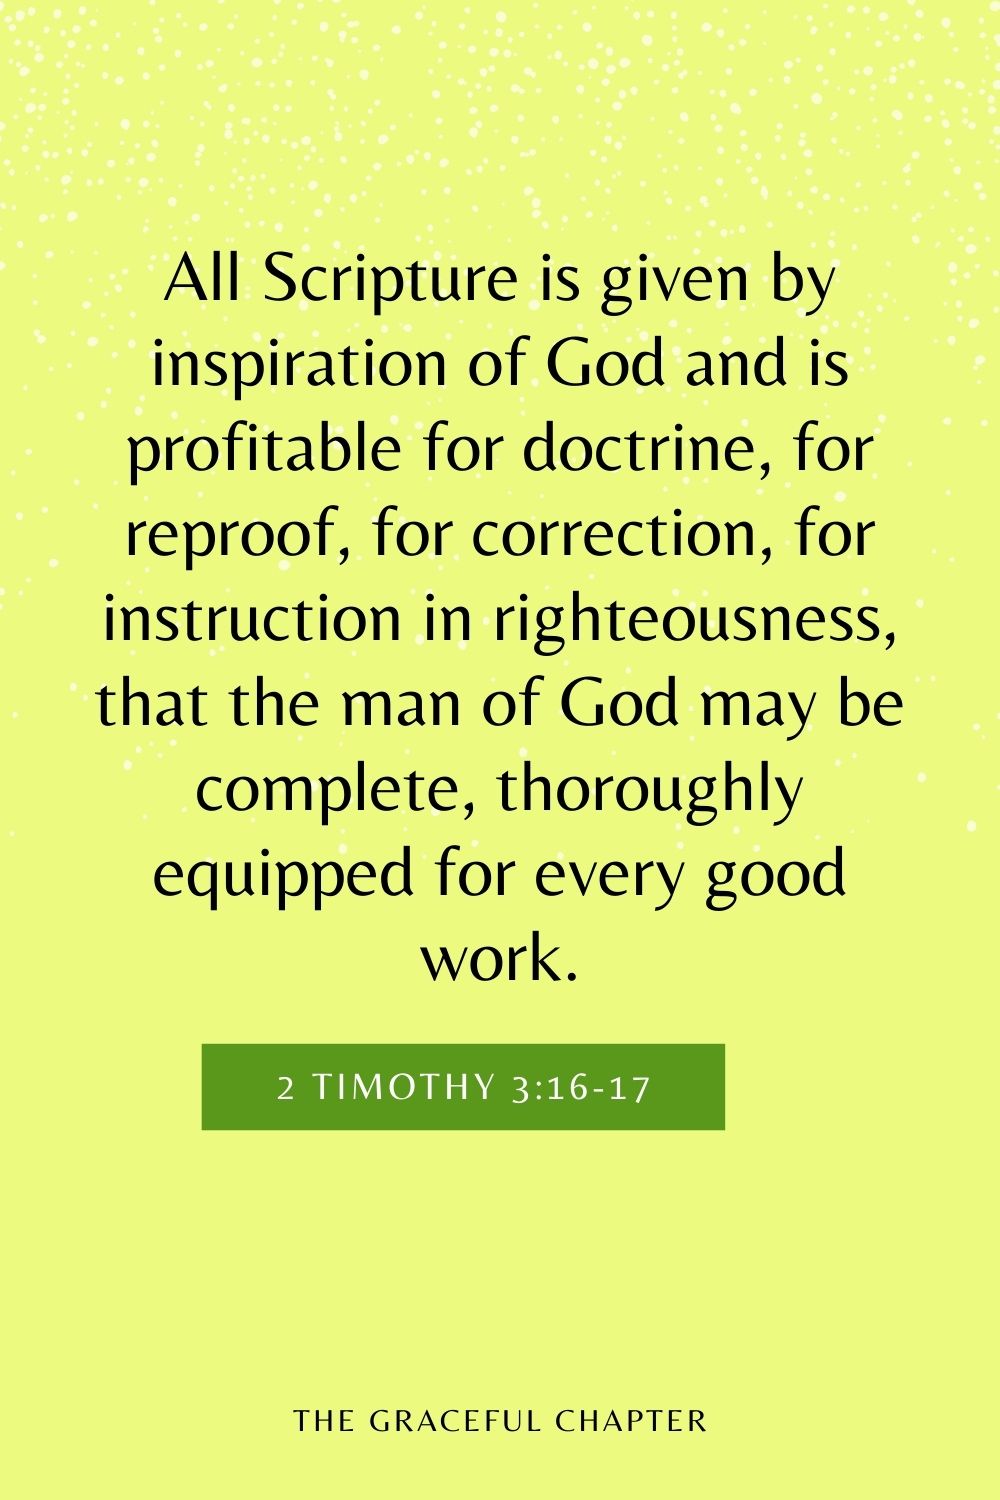 All Scripture is given by inspiration of God and is profitable for doctrine, for reproof, for correction, for instruction in righteousness, that the man of God may be complete, thoroughly equipped for every good work. 2 Timothy 3:16-17